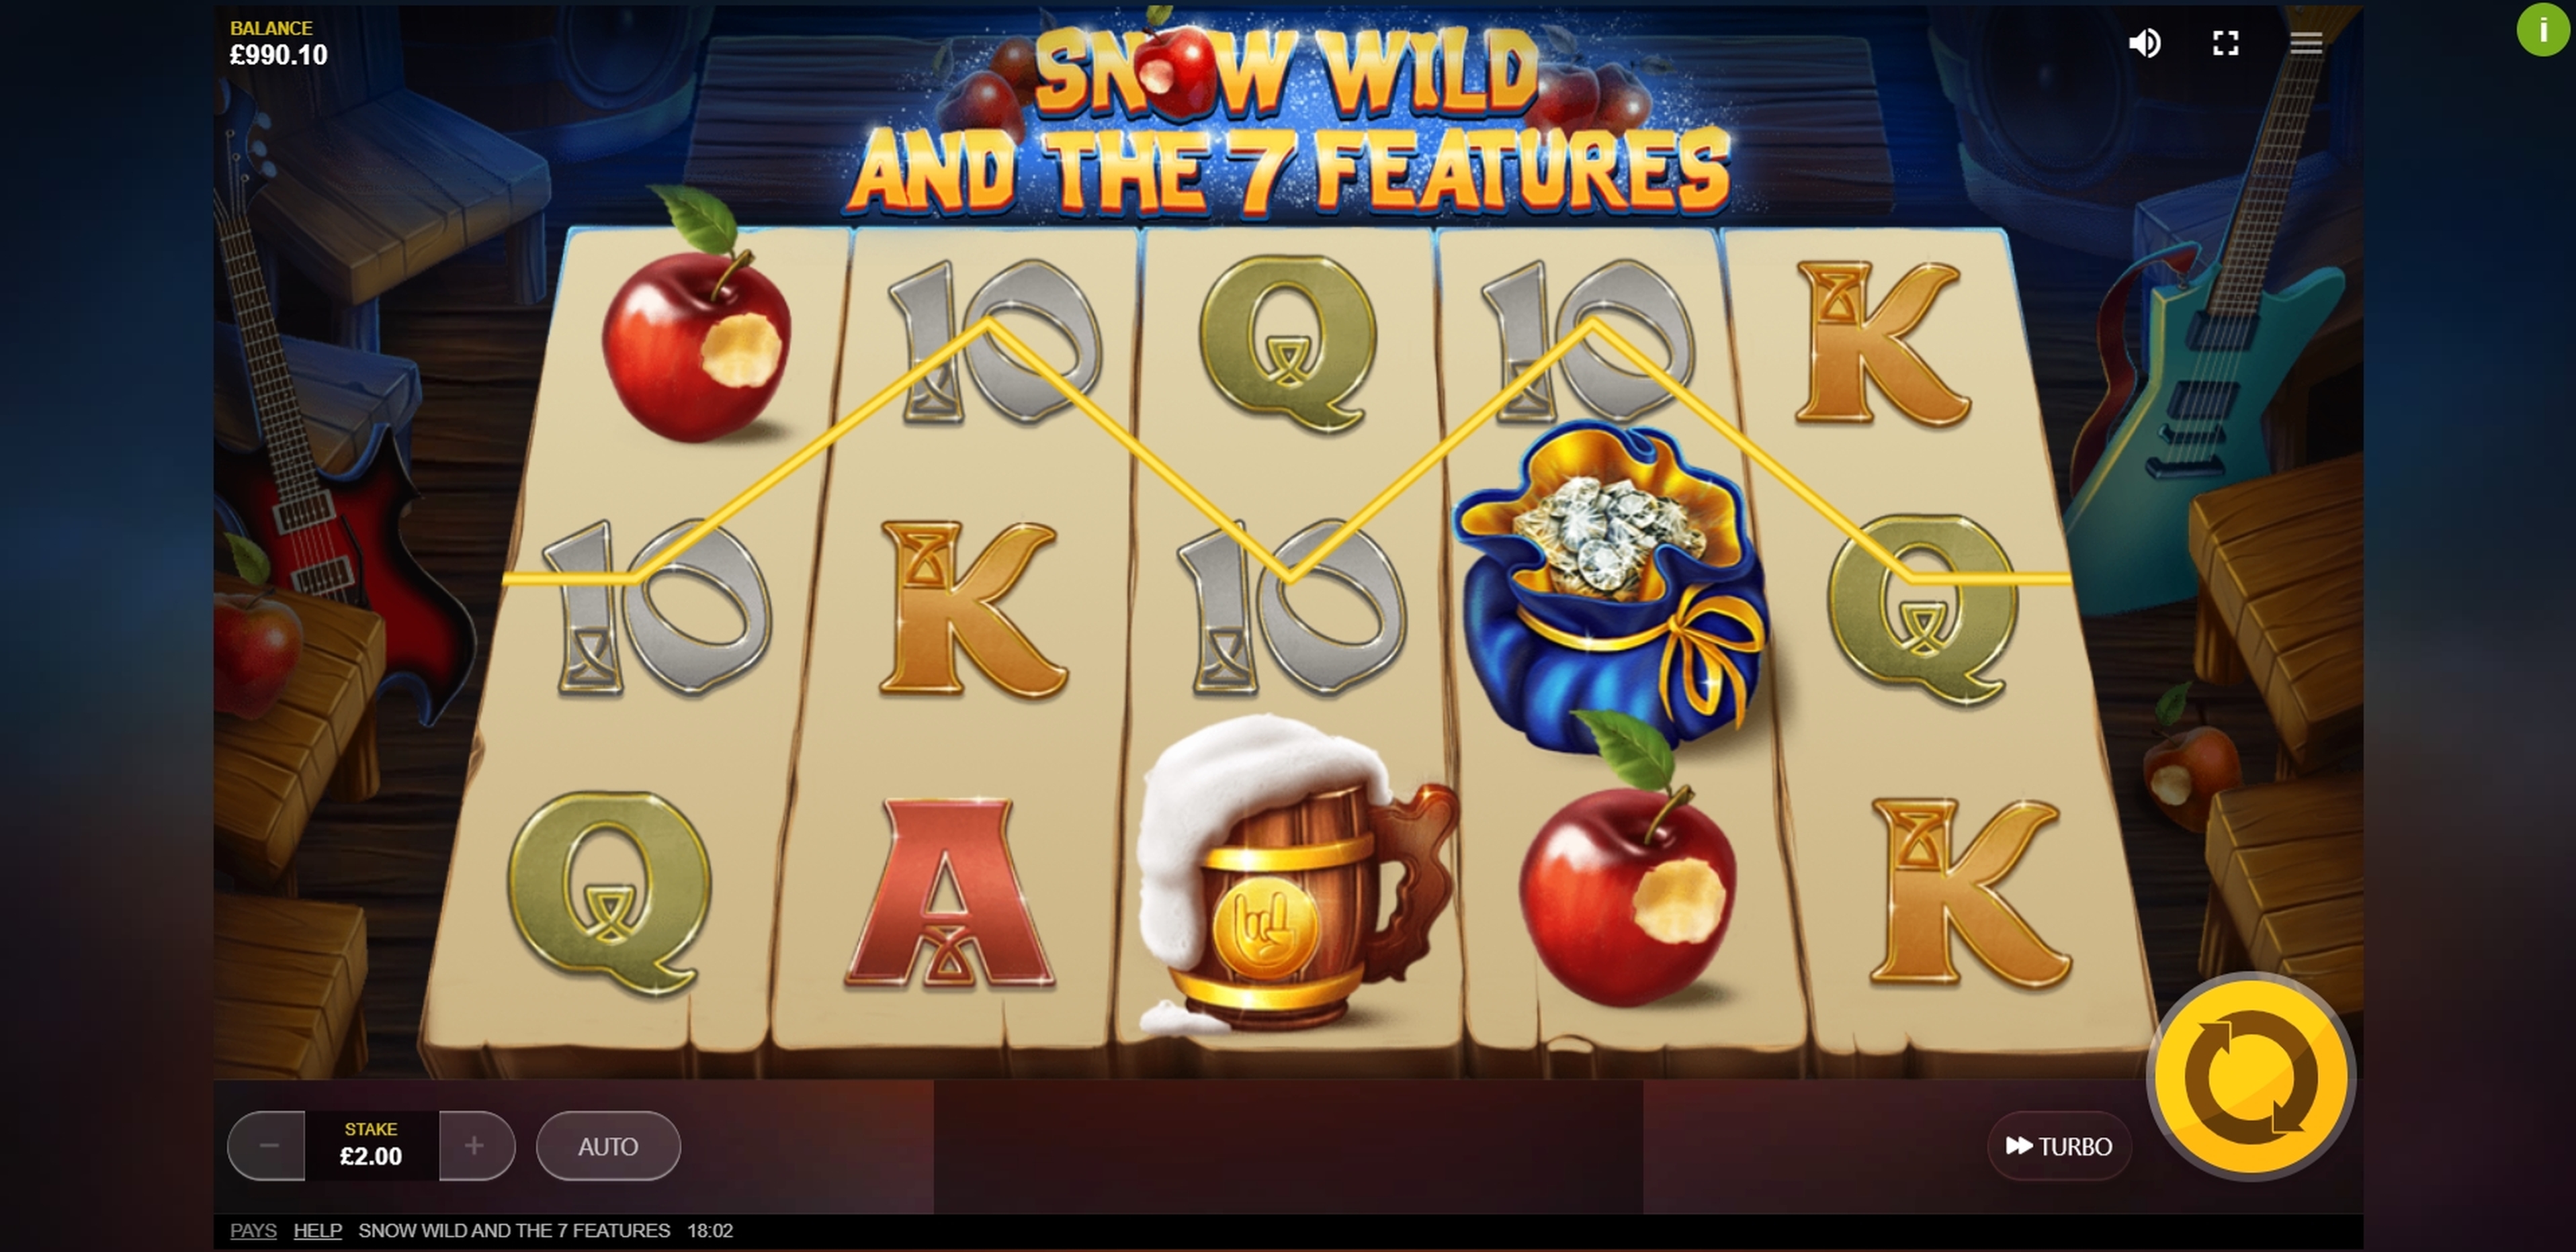 Win Money in Snow wild and the 7 features Free Slot Game by Red Tiger Gaming